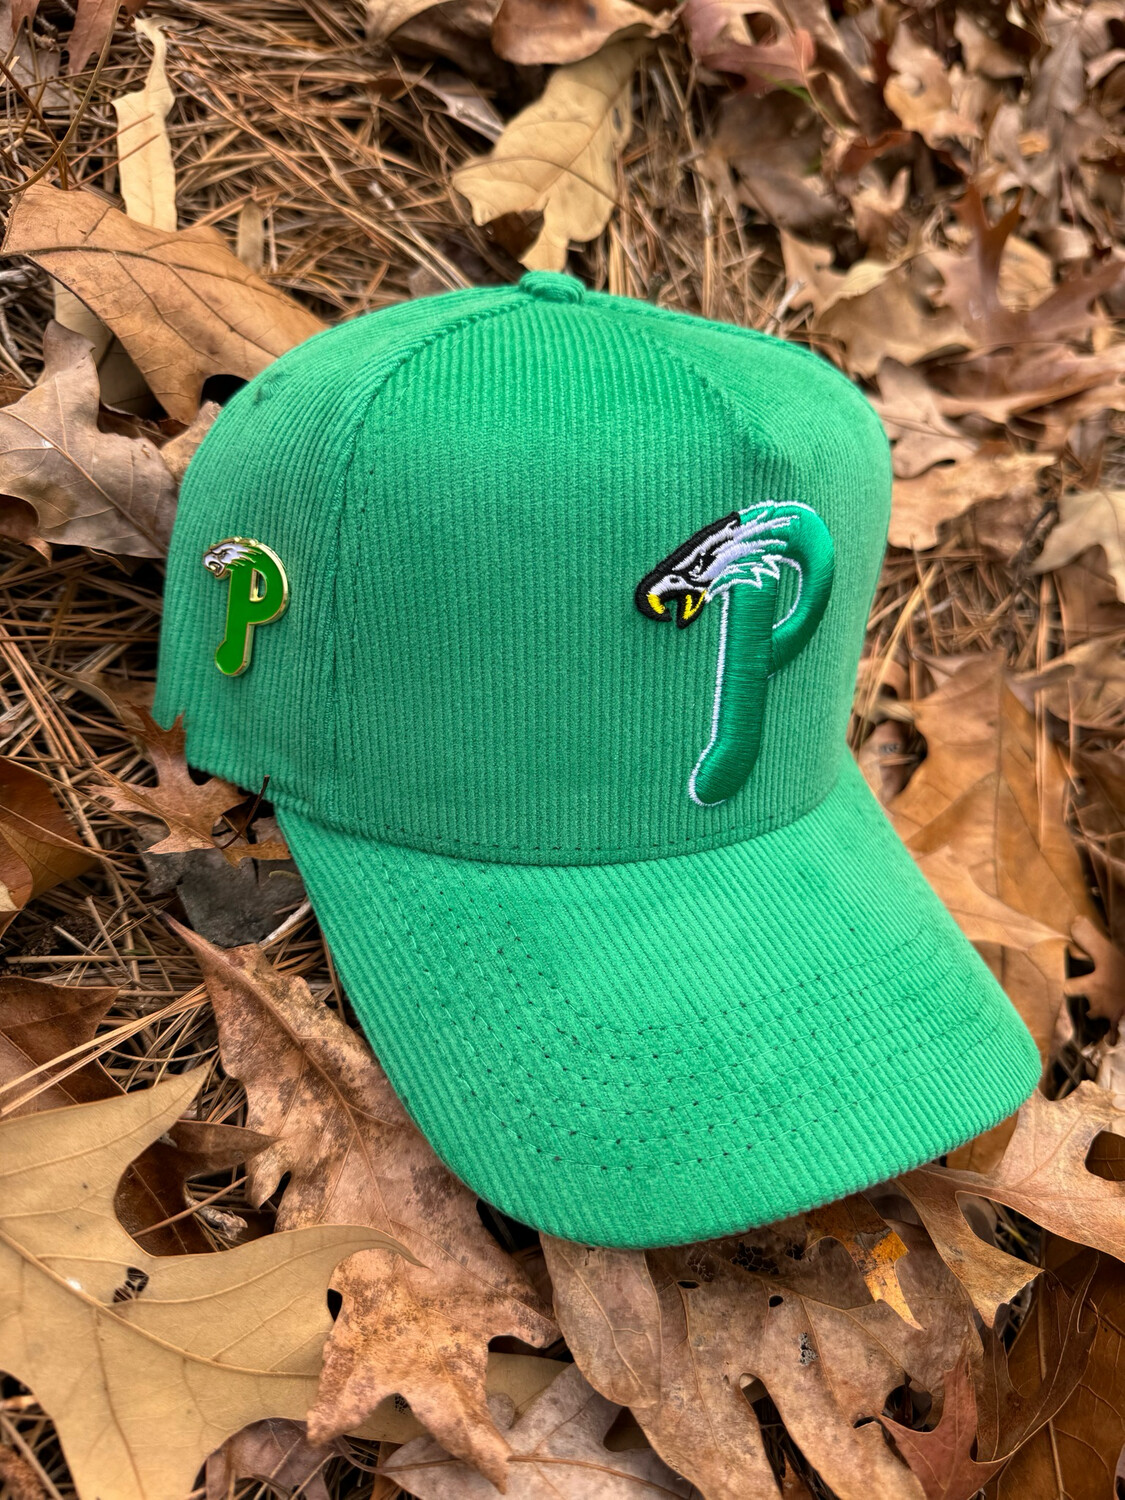 CORDUROY KELLY GREEN “PHILLY”